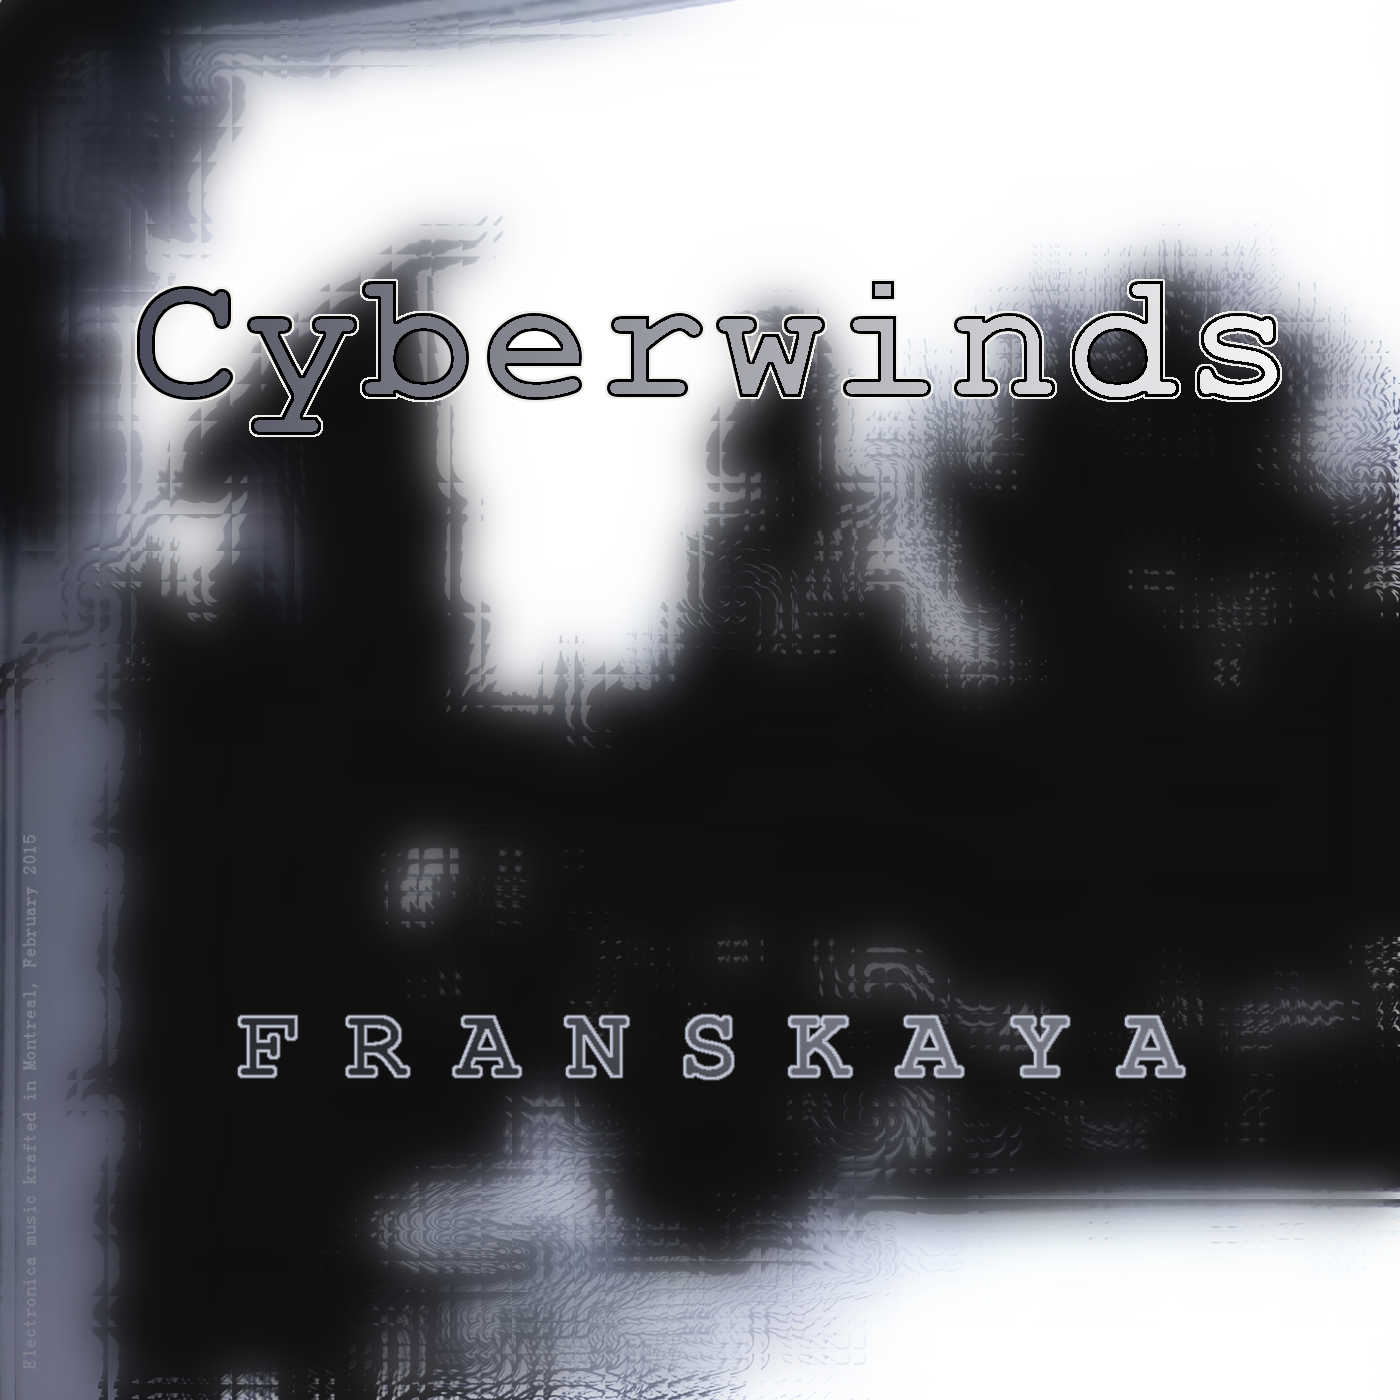 Cover image for the single Cyberwinds by Franskaya